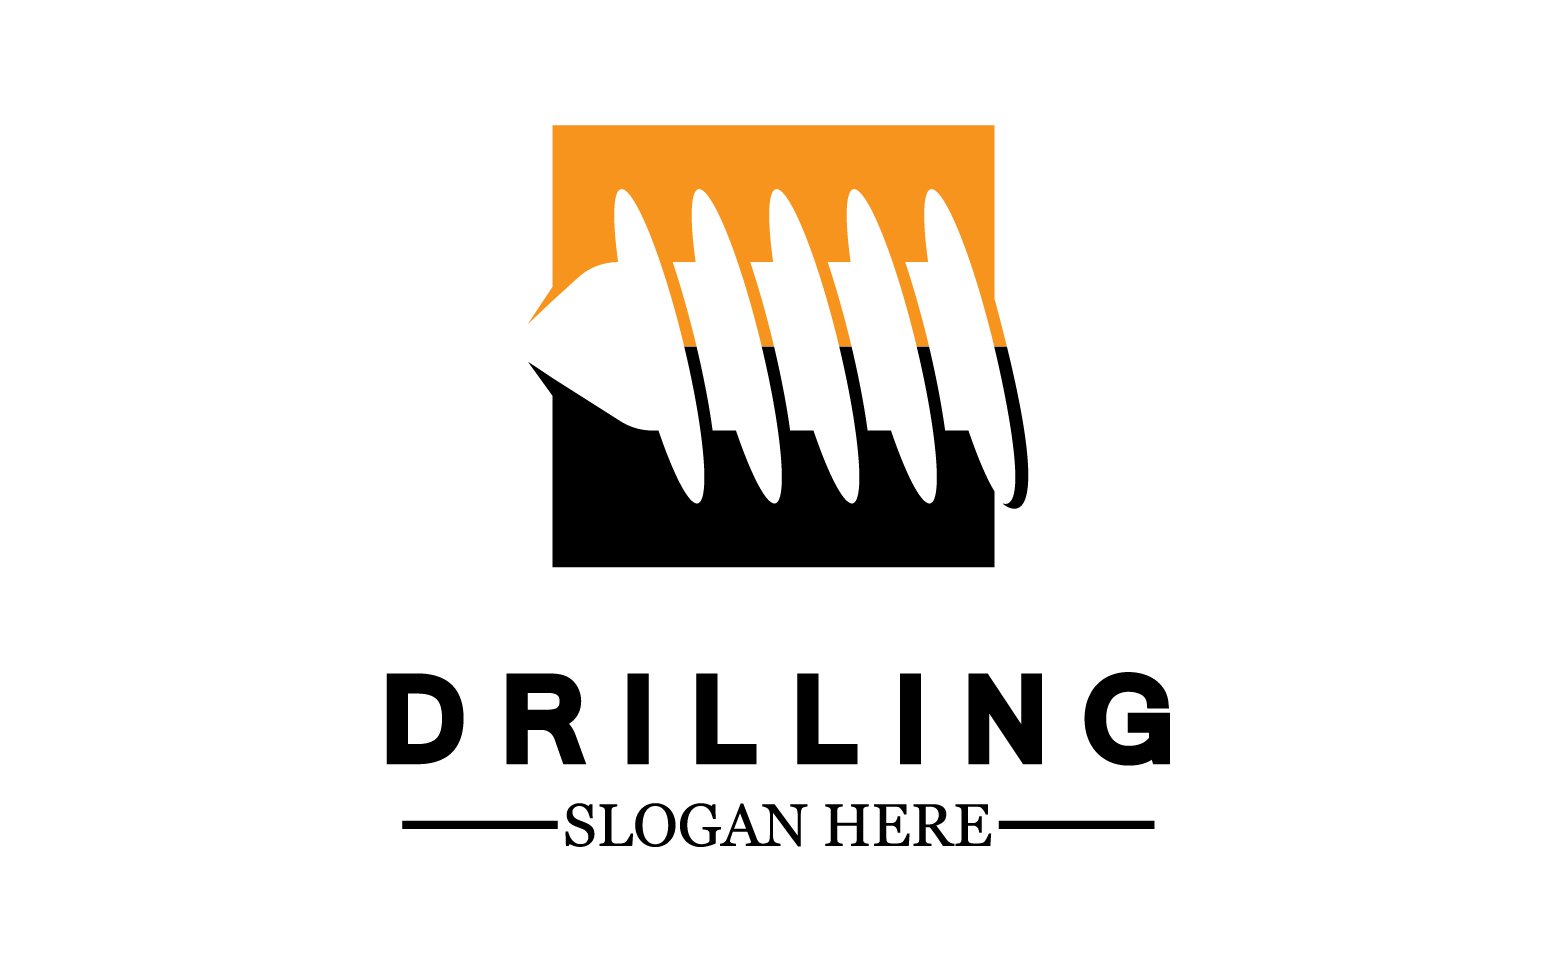 Emblem of water well drilling logo version 2